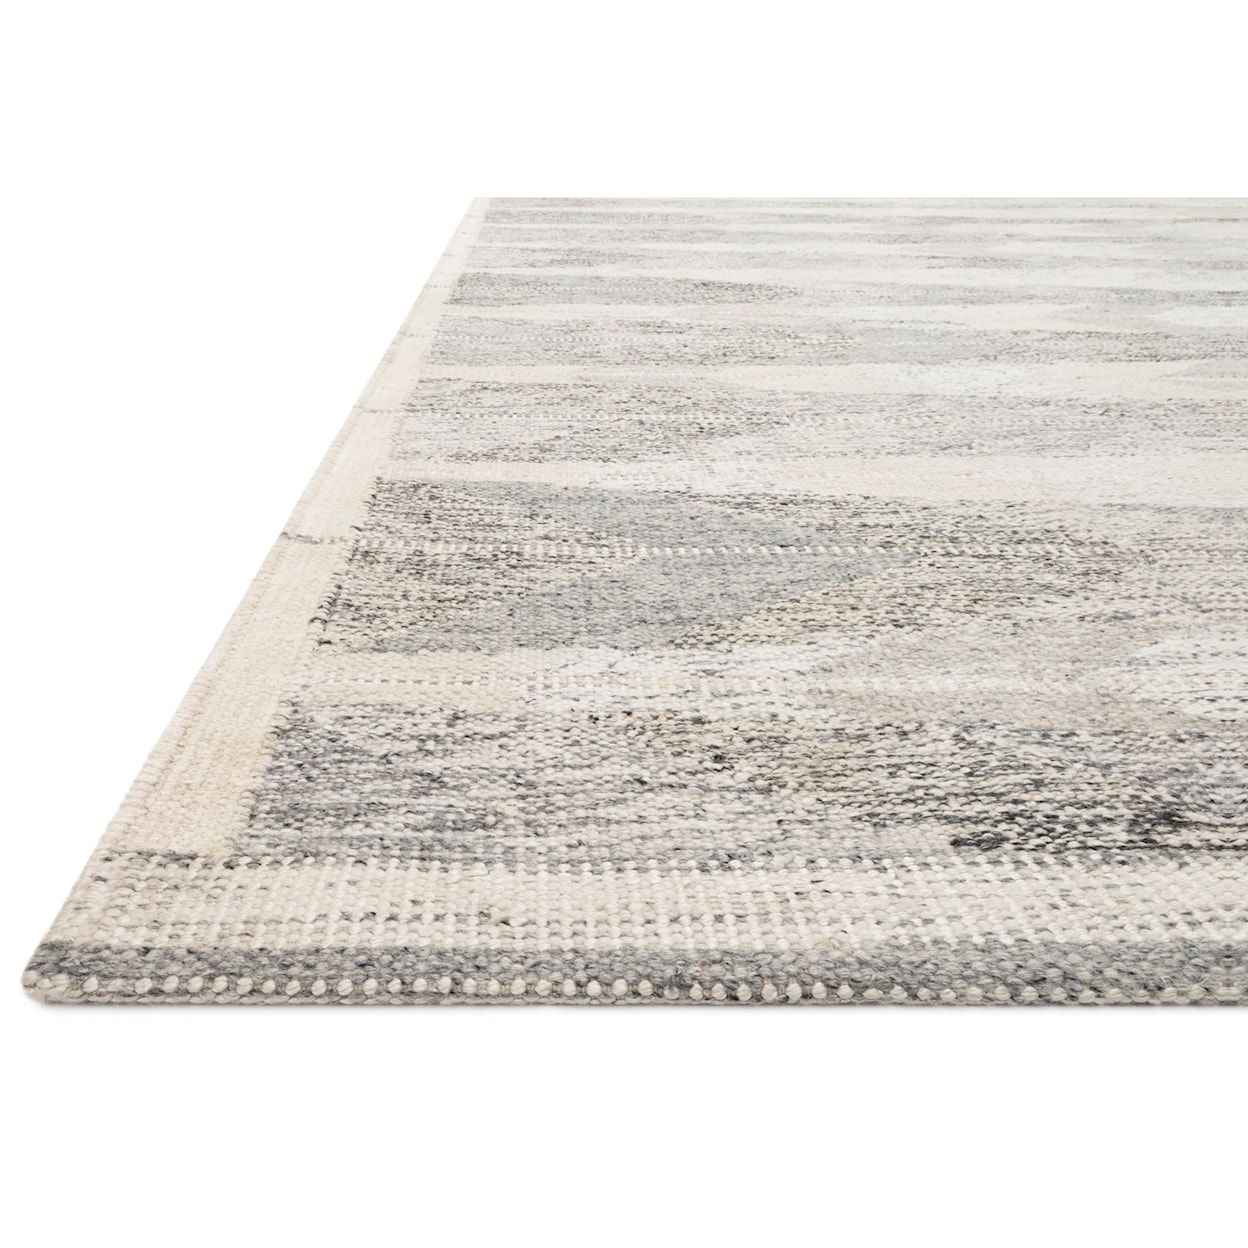 Reeds Rugs Evelina 5'0" x 7'6" Pewter / Silver Rug